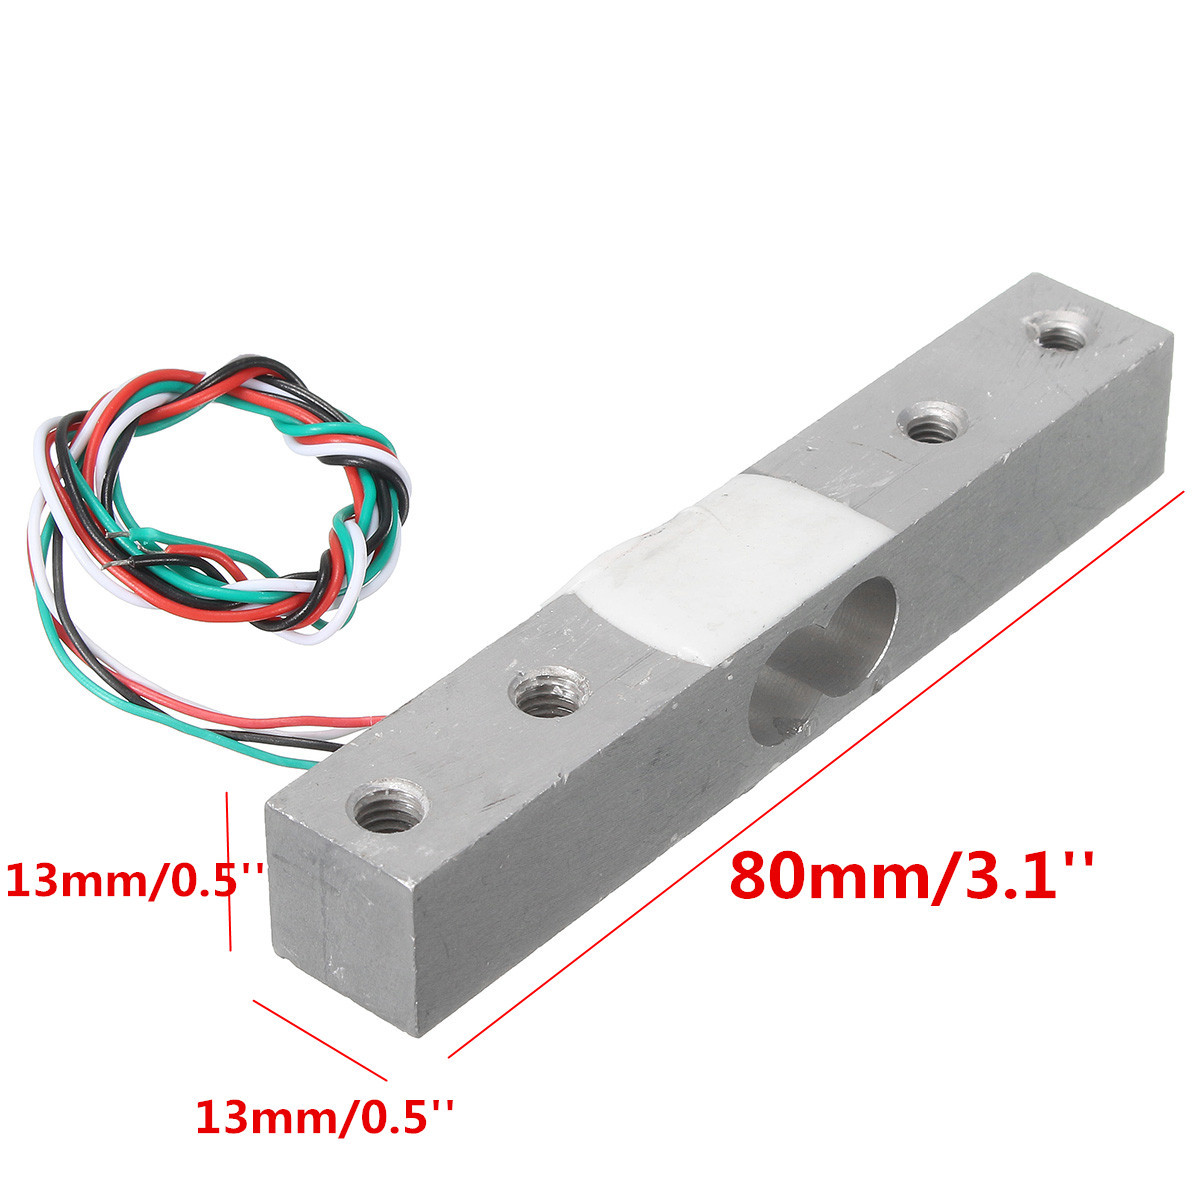 HX711-Module--20kg-Aluminum-Alloy-Scale-Weighing-Sensor-Load-Cell-Kit-1112121